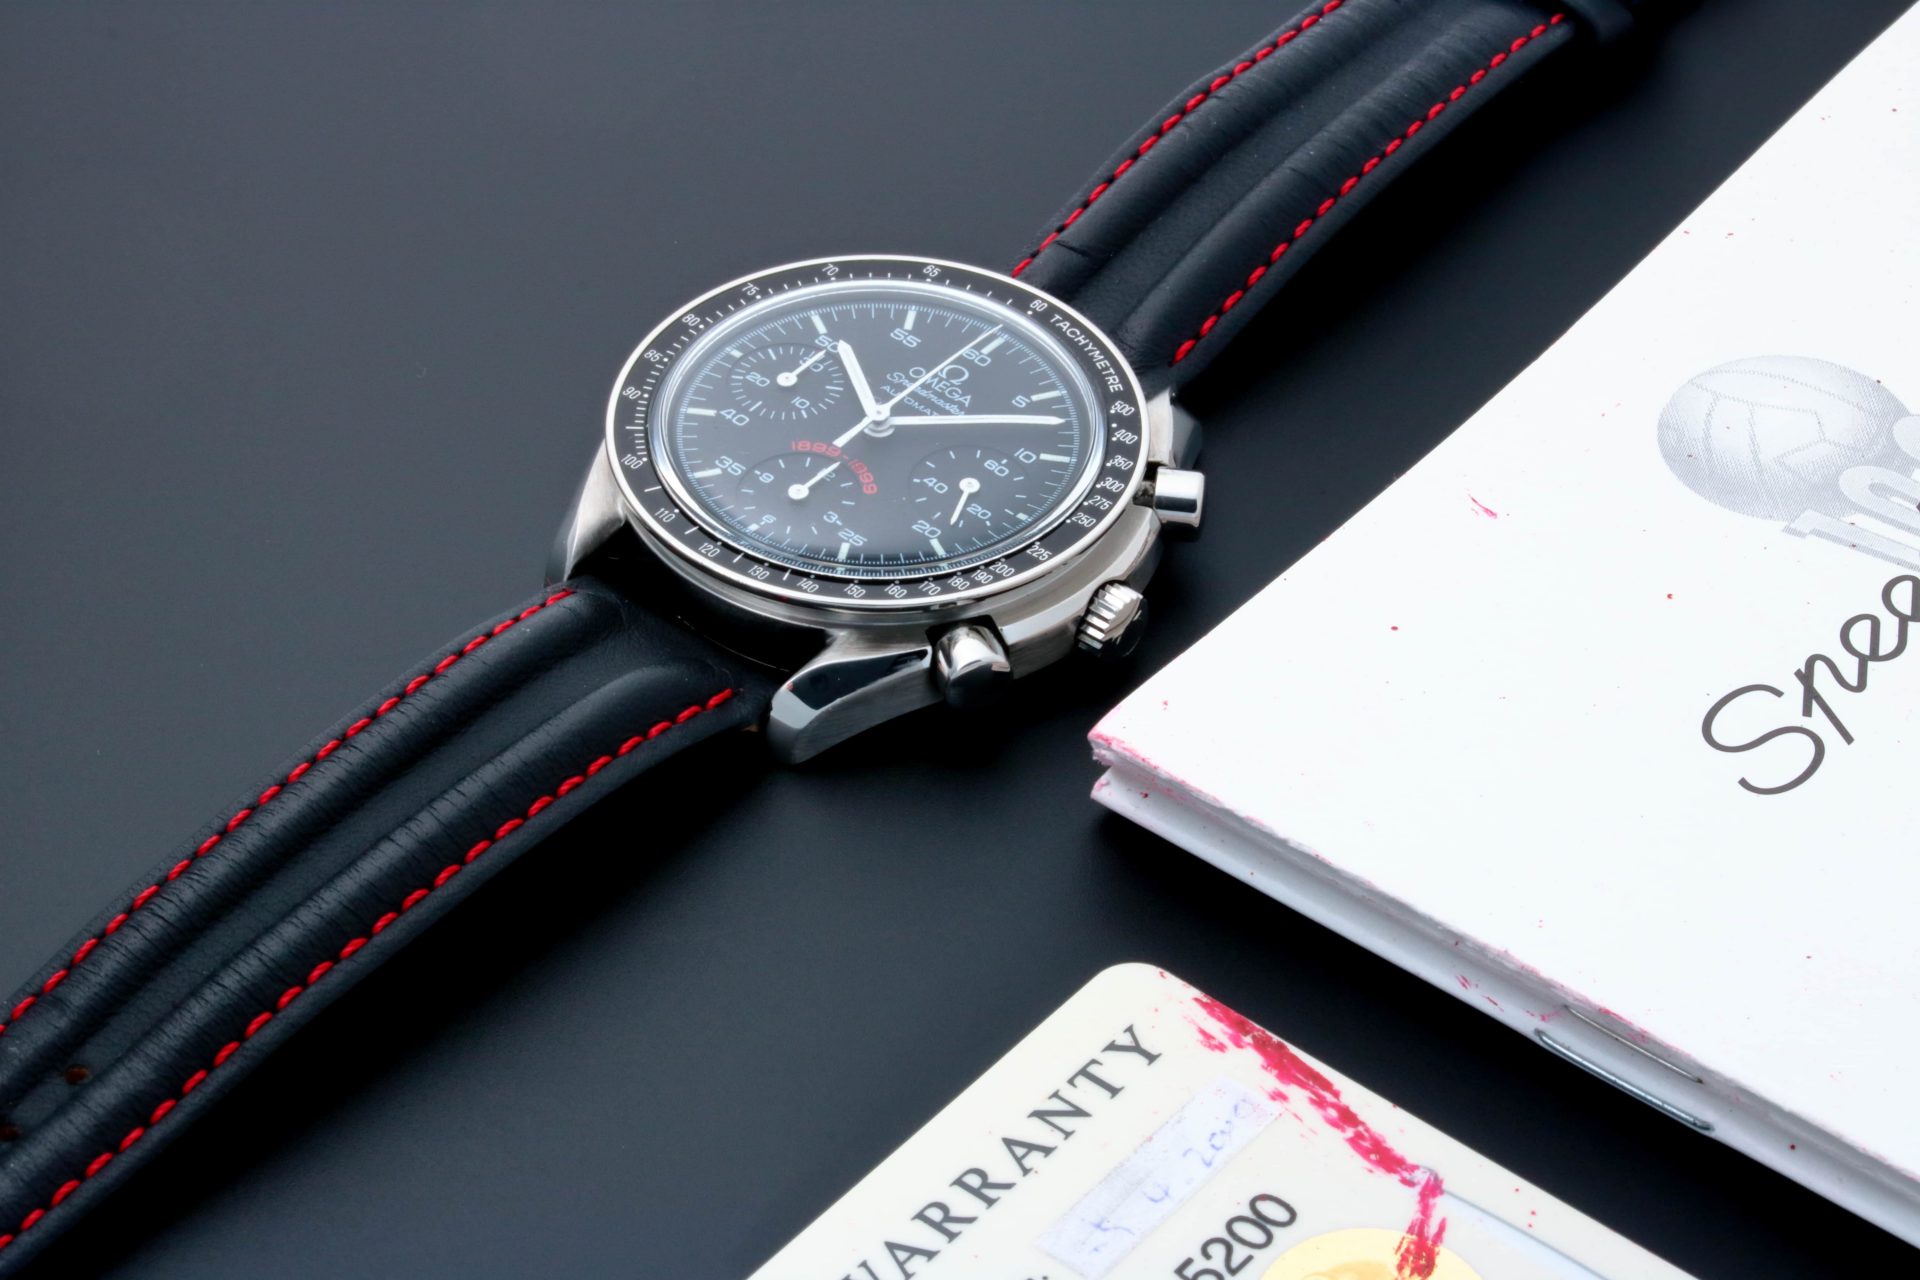 Omega Speedmaster A.C. Milan Watch 3810.51.41 With Warranty Card And Certificate Of Authenticity